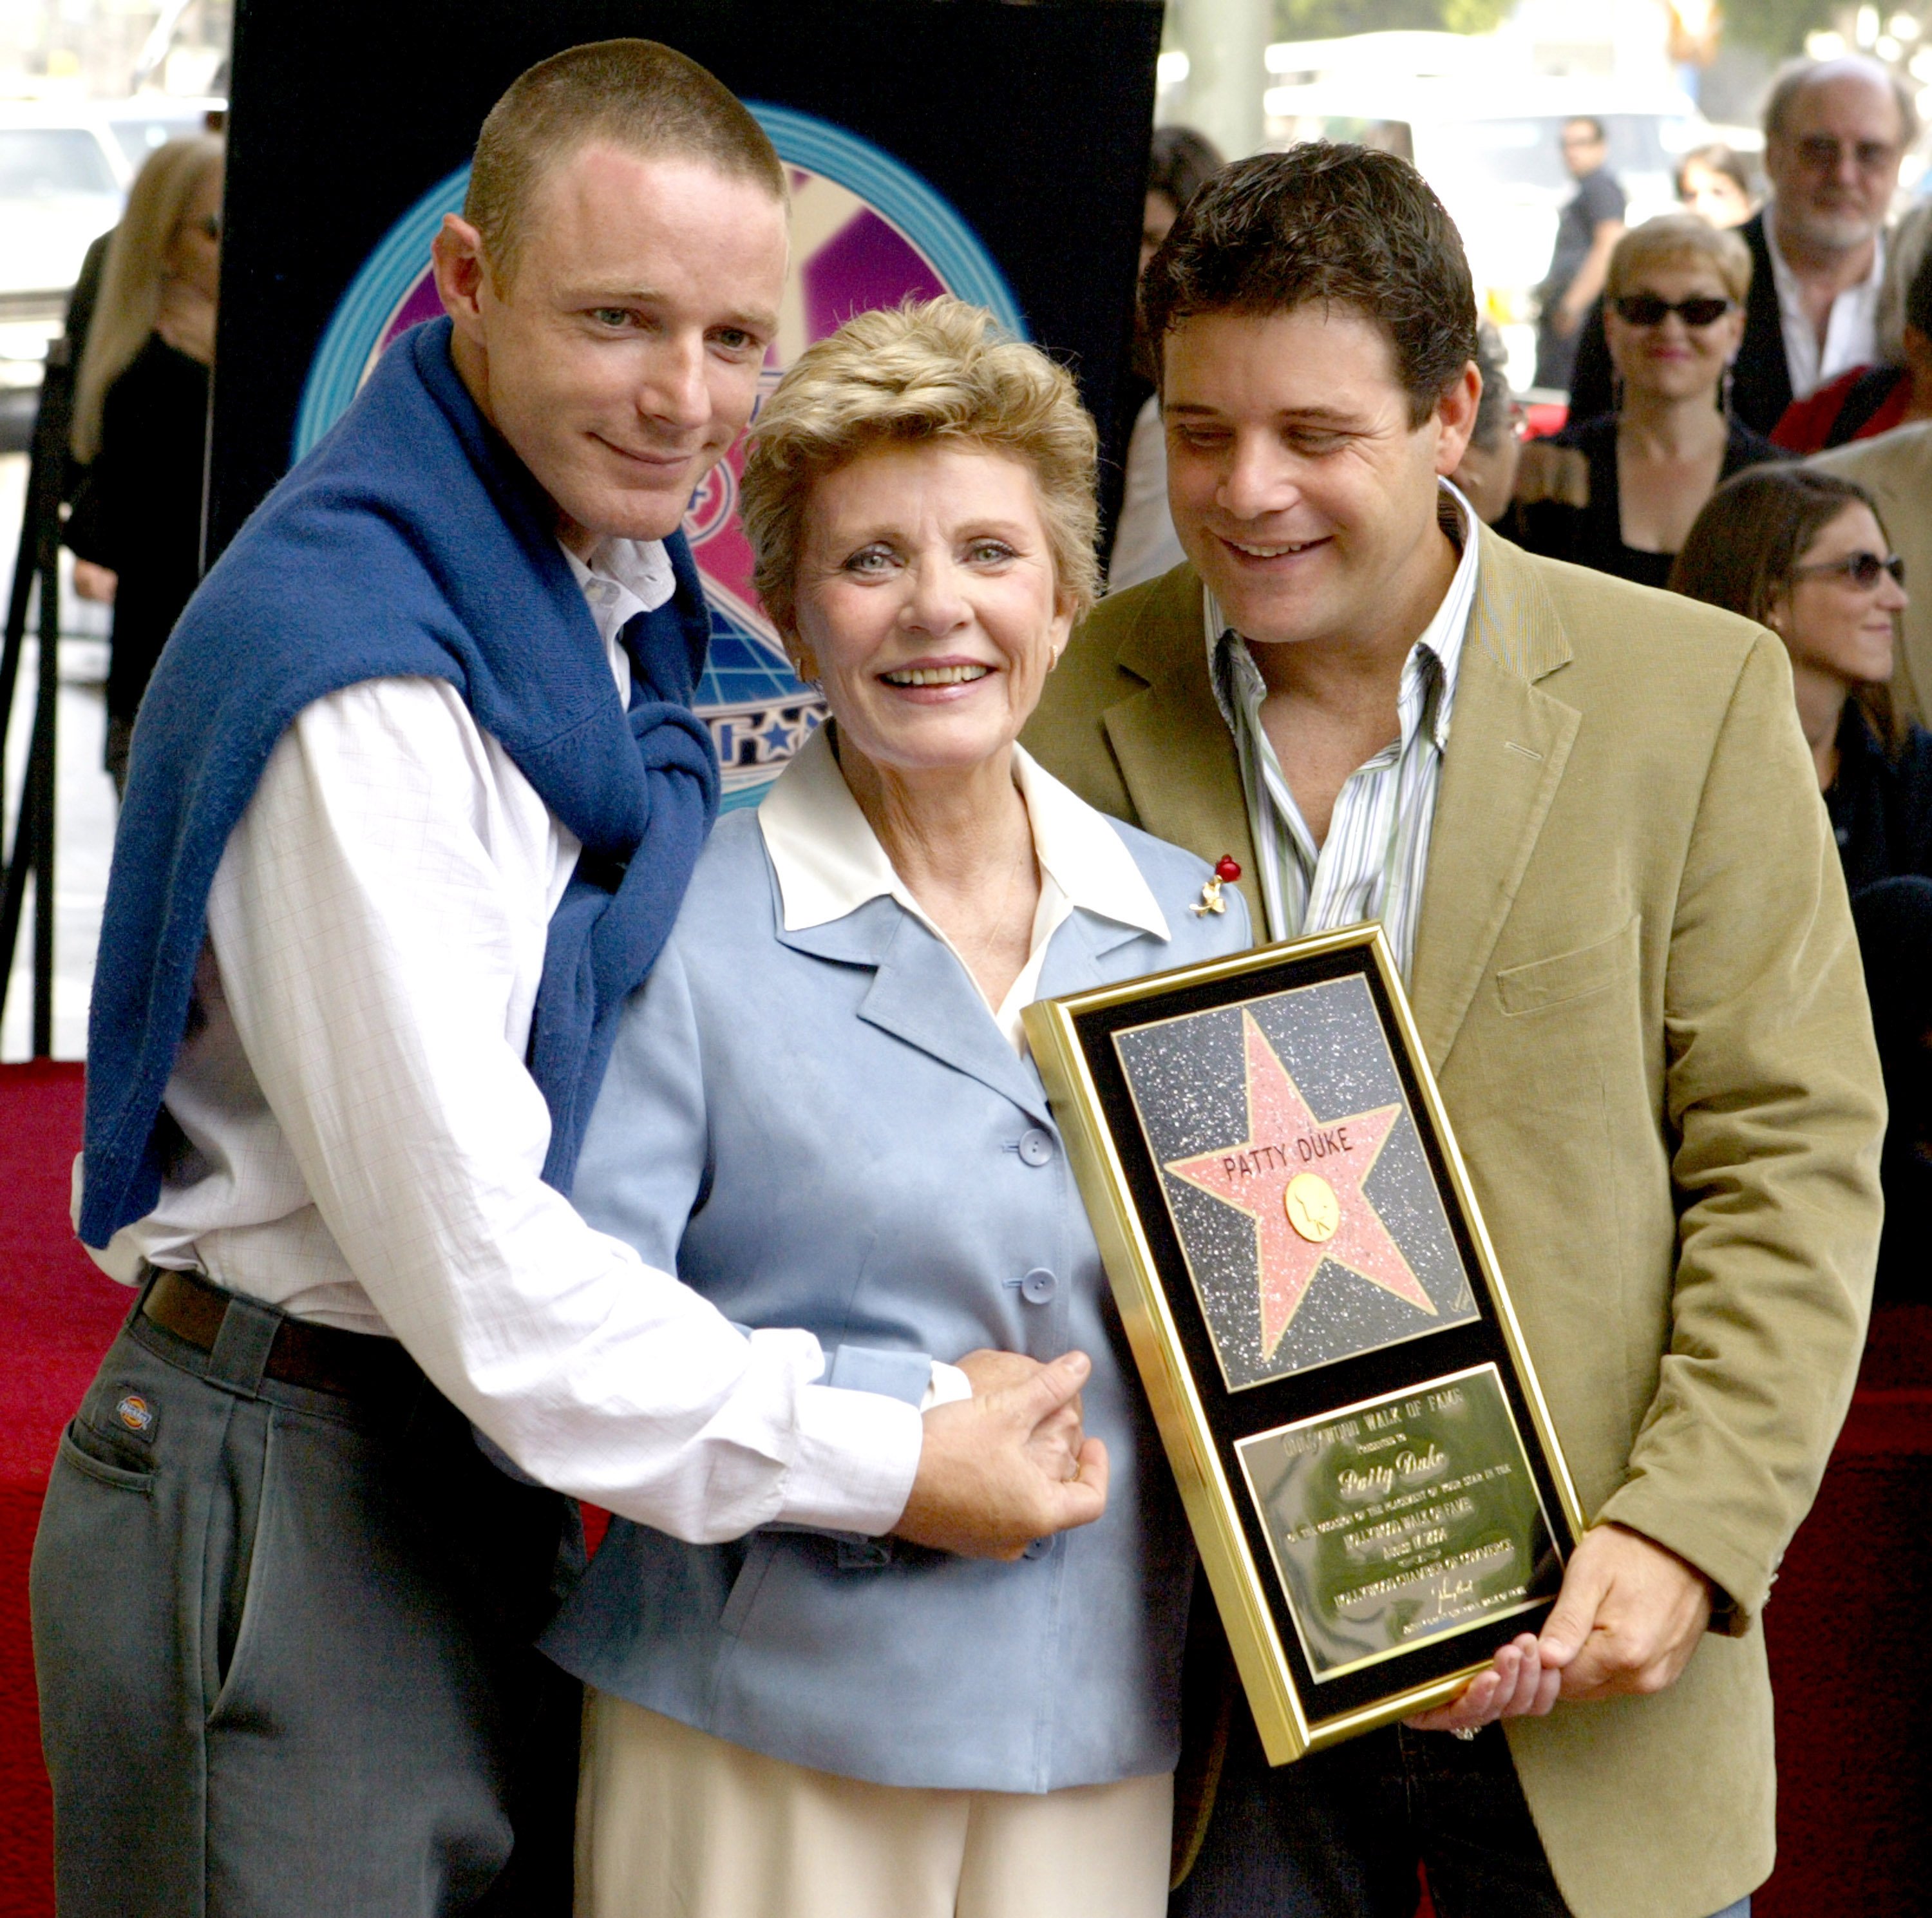 Mackenzie Astin, Patty Duke, and Sean Astin when she received a Star on the Hollywood Walk of Fame in 2004. | Source: Getty Images